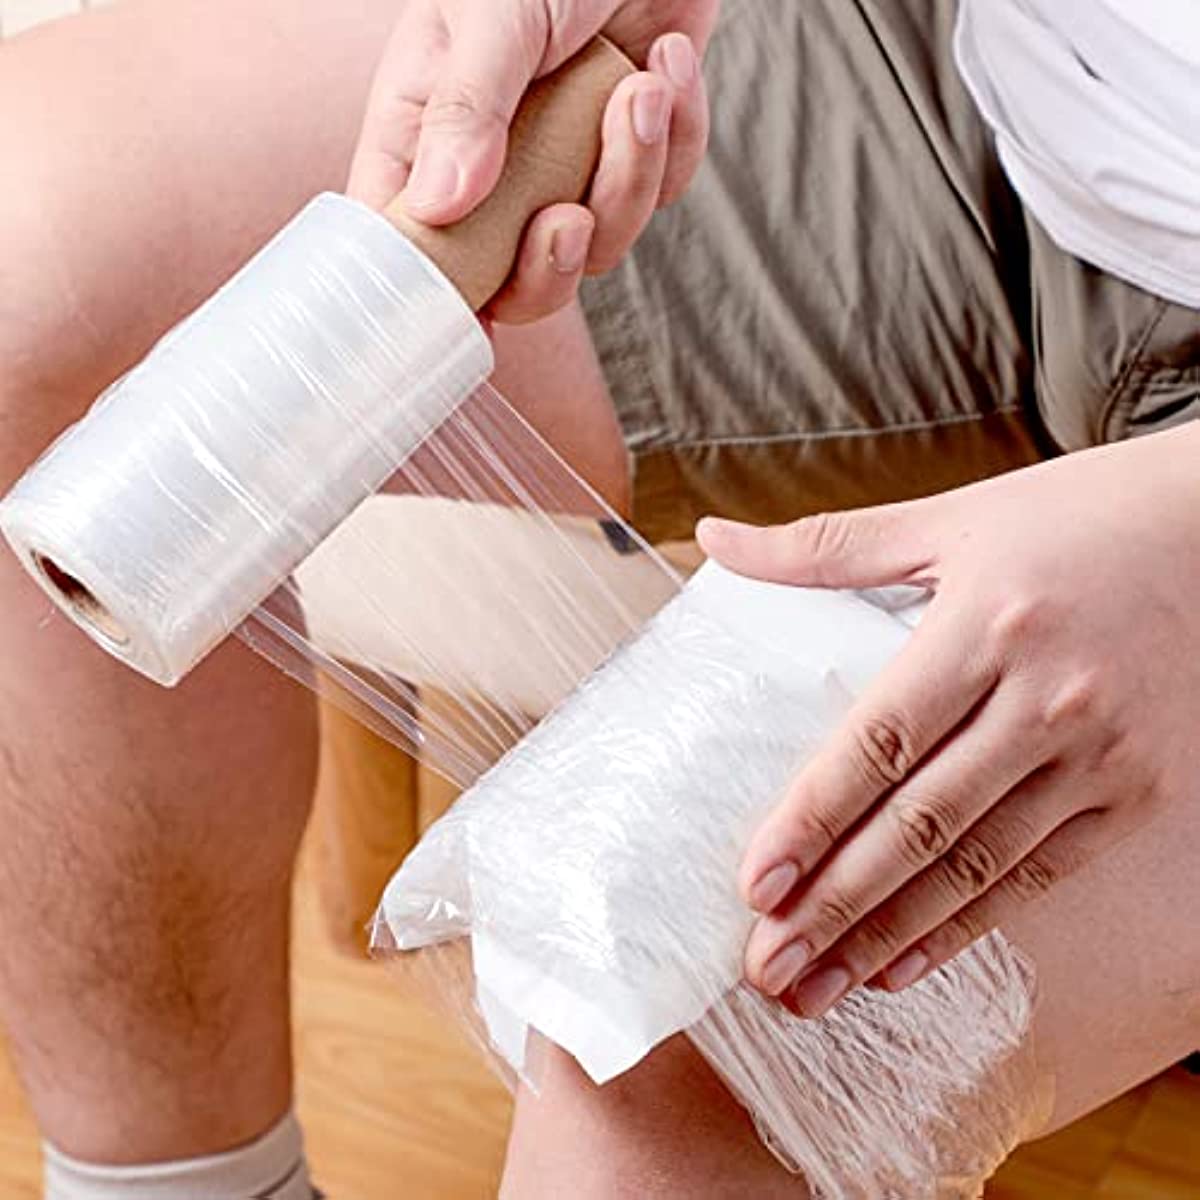 4 Rolls Wrap Plastic Film with Handle Plastic Bags for Ice Tattoo Plastic Wrap Suitable for Athletic Trainers to Hold Ice Packs in Place for Moving Supplies Stretch Wrap Shrink Wrap, 5 Inches x 500 ft